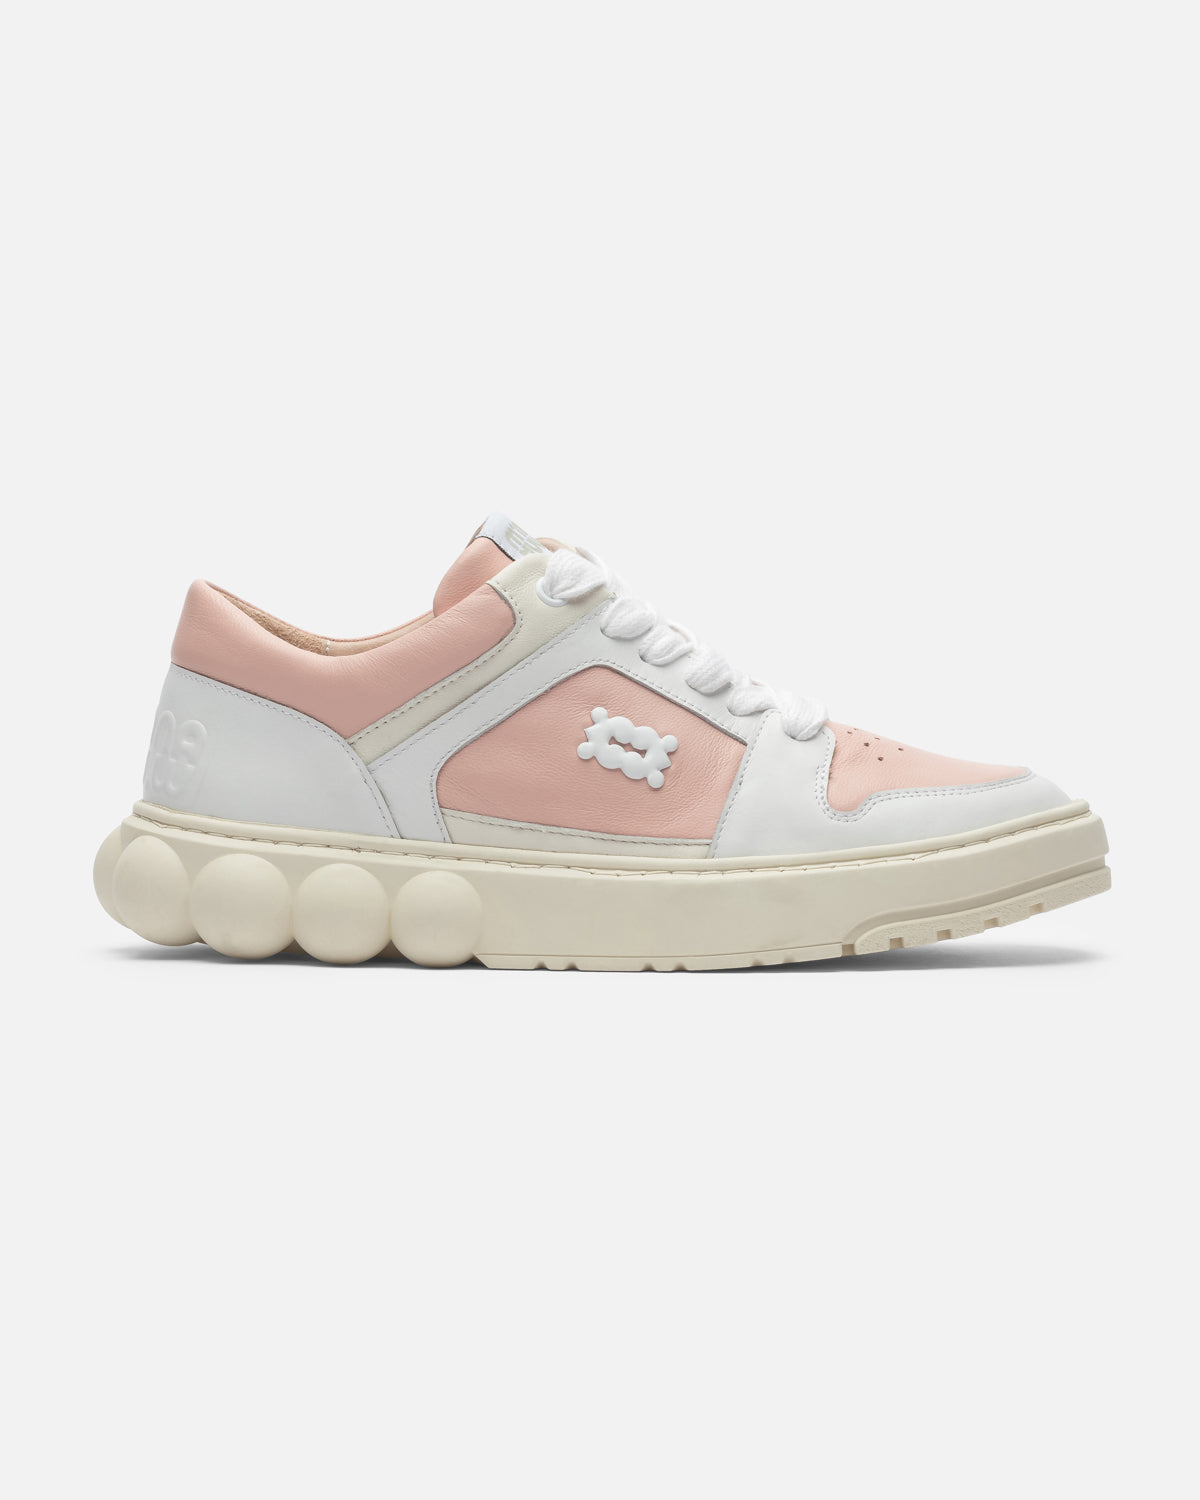 Oyster Pink/White Leather